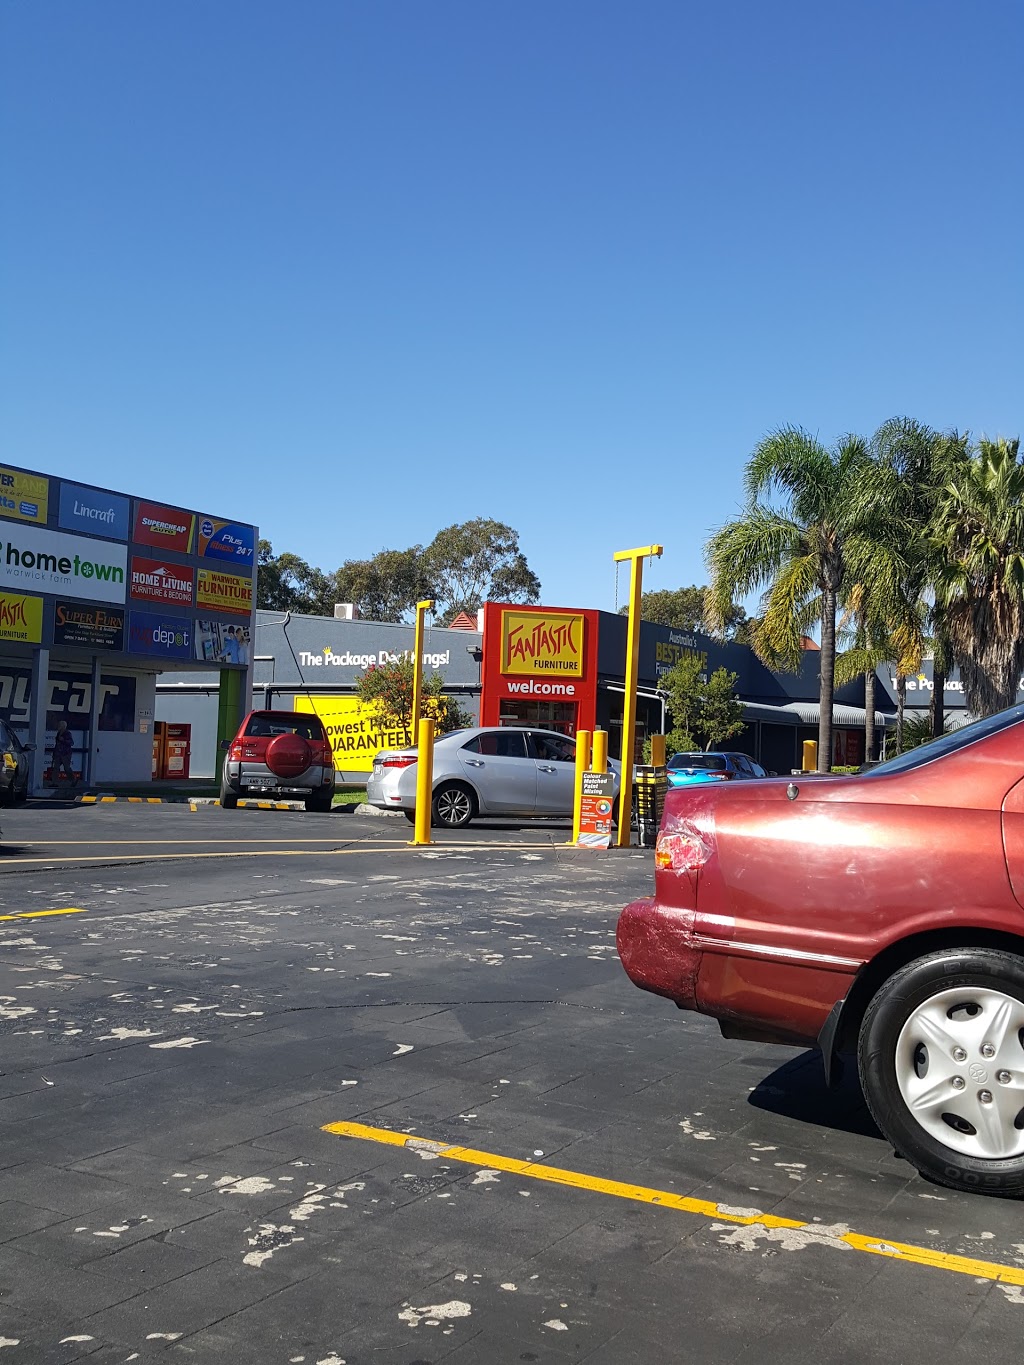 Supercheap Auto | electronics store | Cnr Sappho Road and, Hume Hwy, Warwick Farm NSW 2170, Australia | 0298227299 OR +61 2 9822 7299